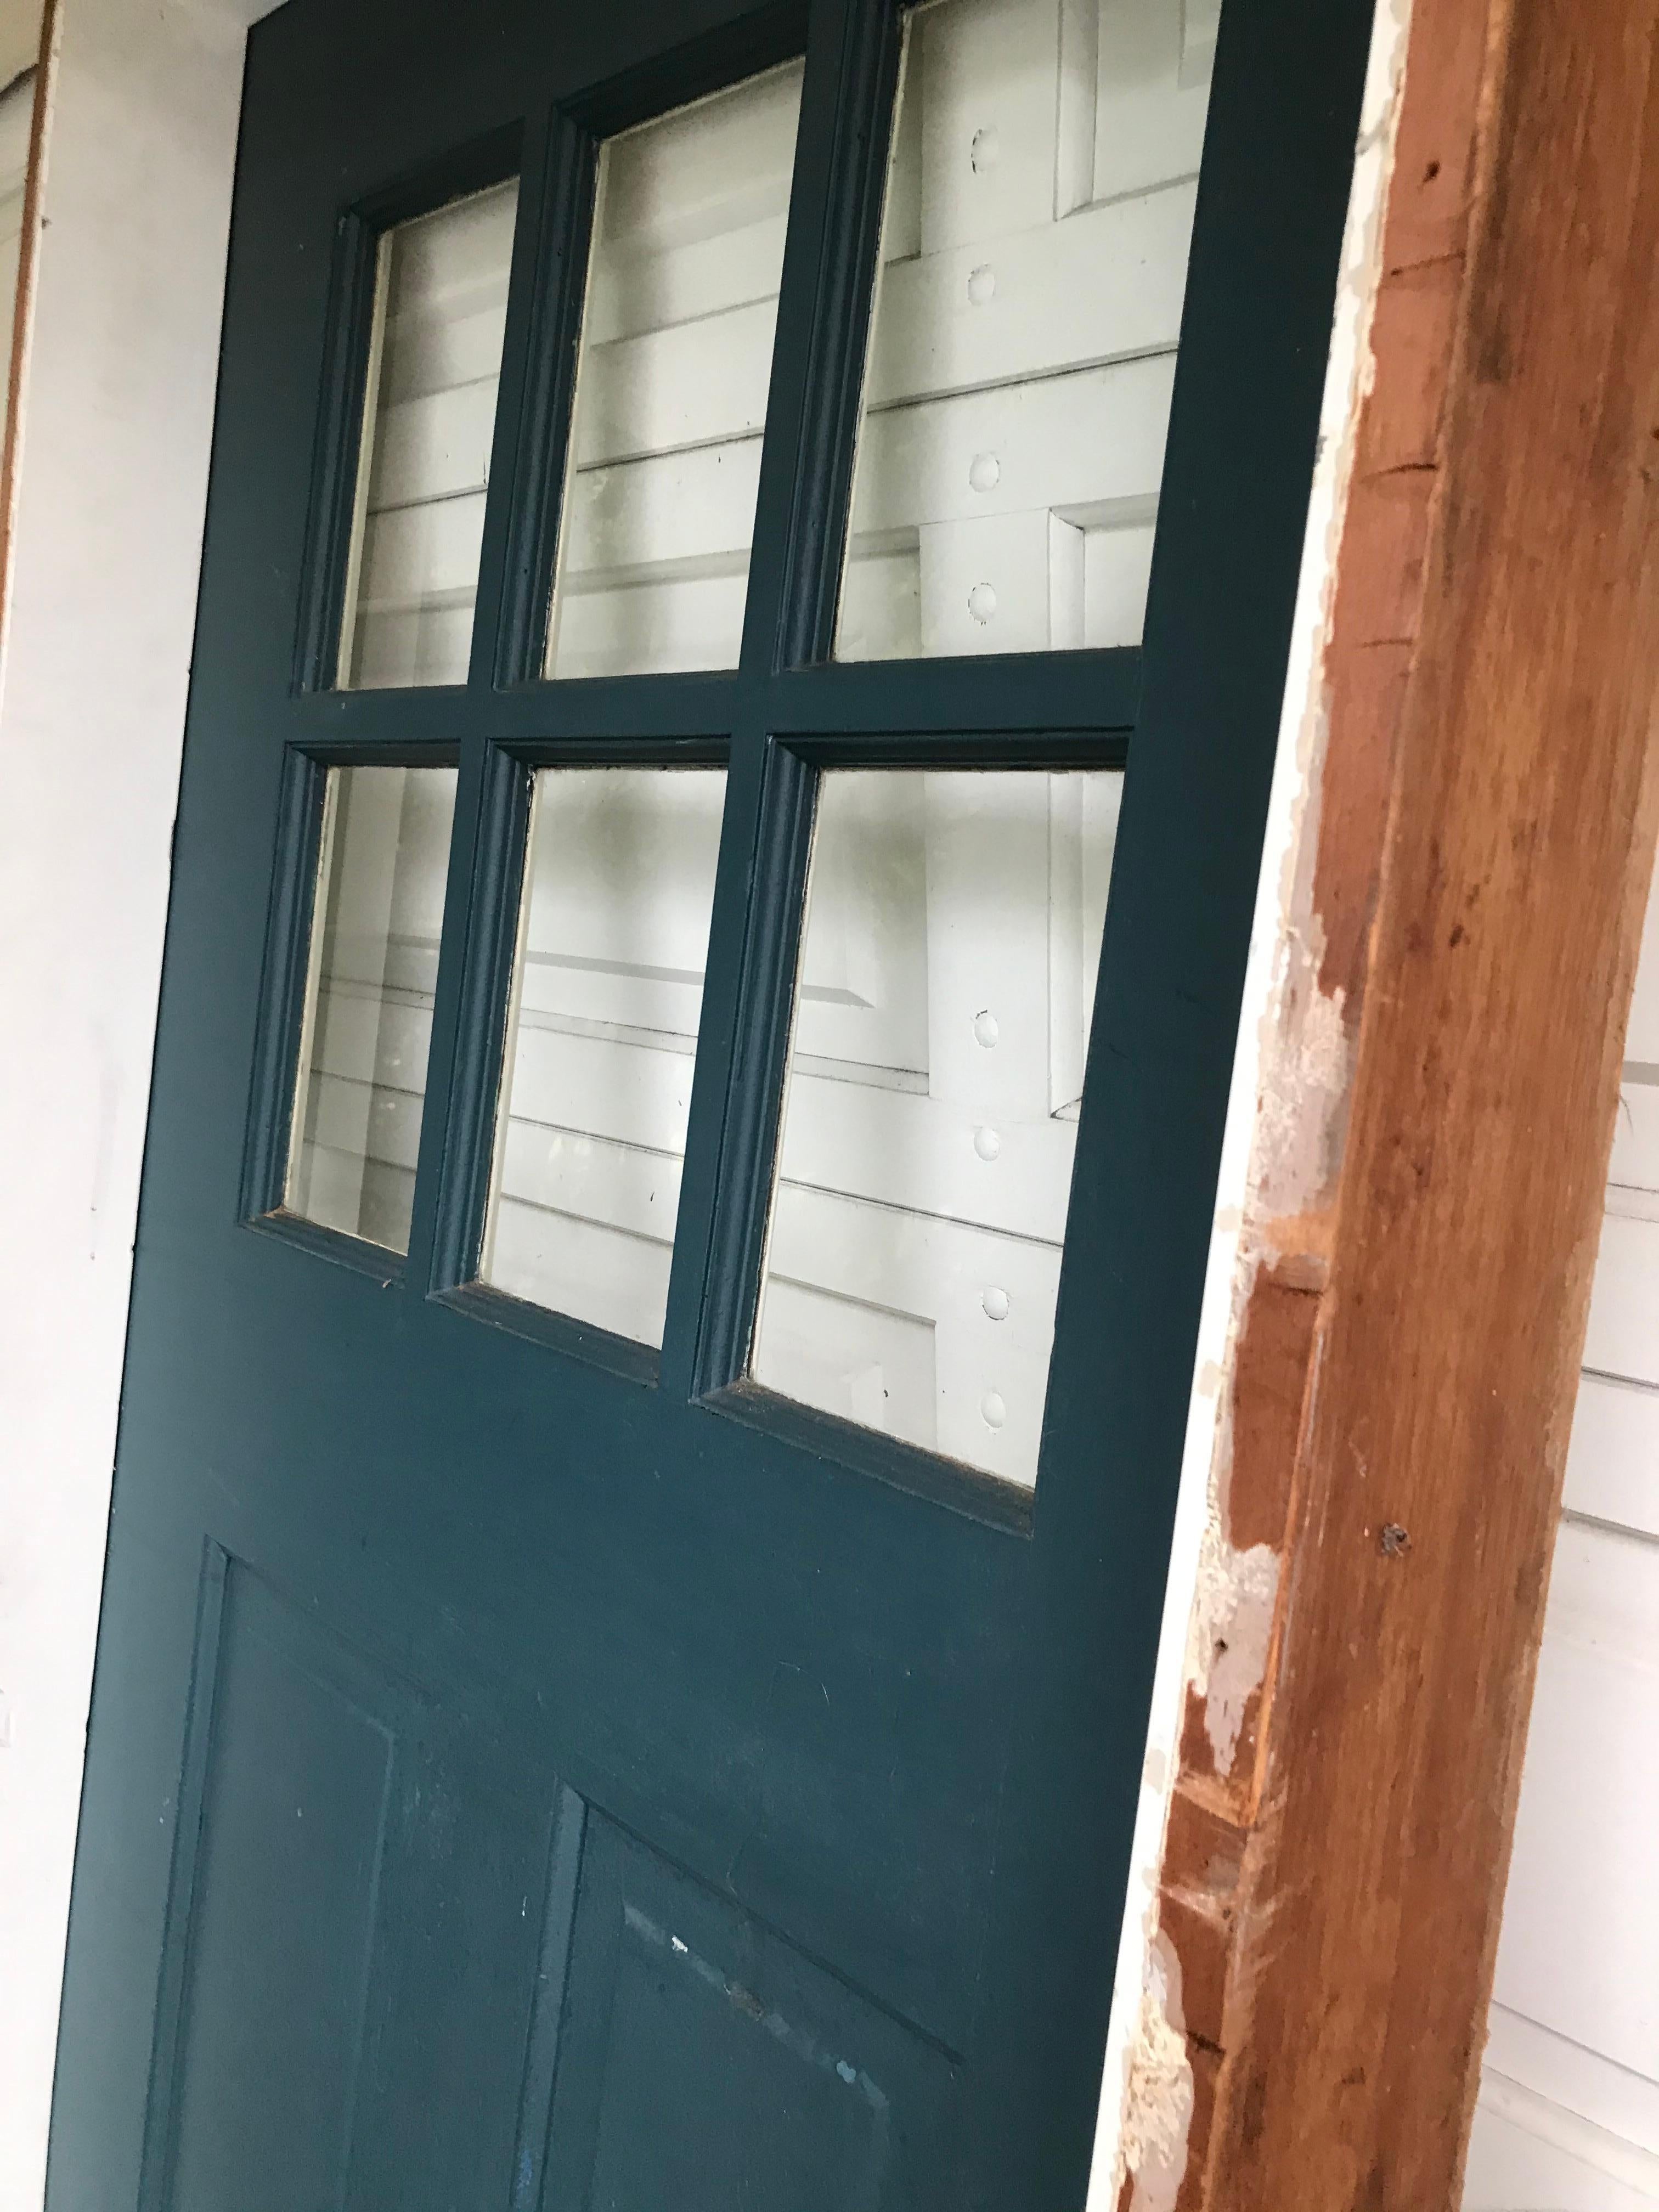 Large Arts & Crafts Craftsman Solid Wood Framed Door with Window & Hardware In Good Condition For Sale In Vancouver, British Columbia